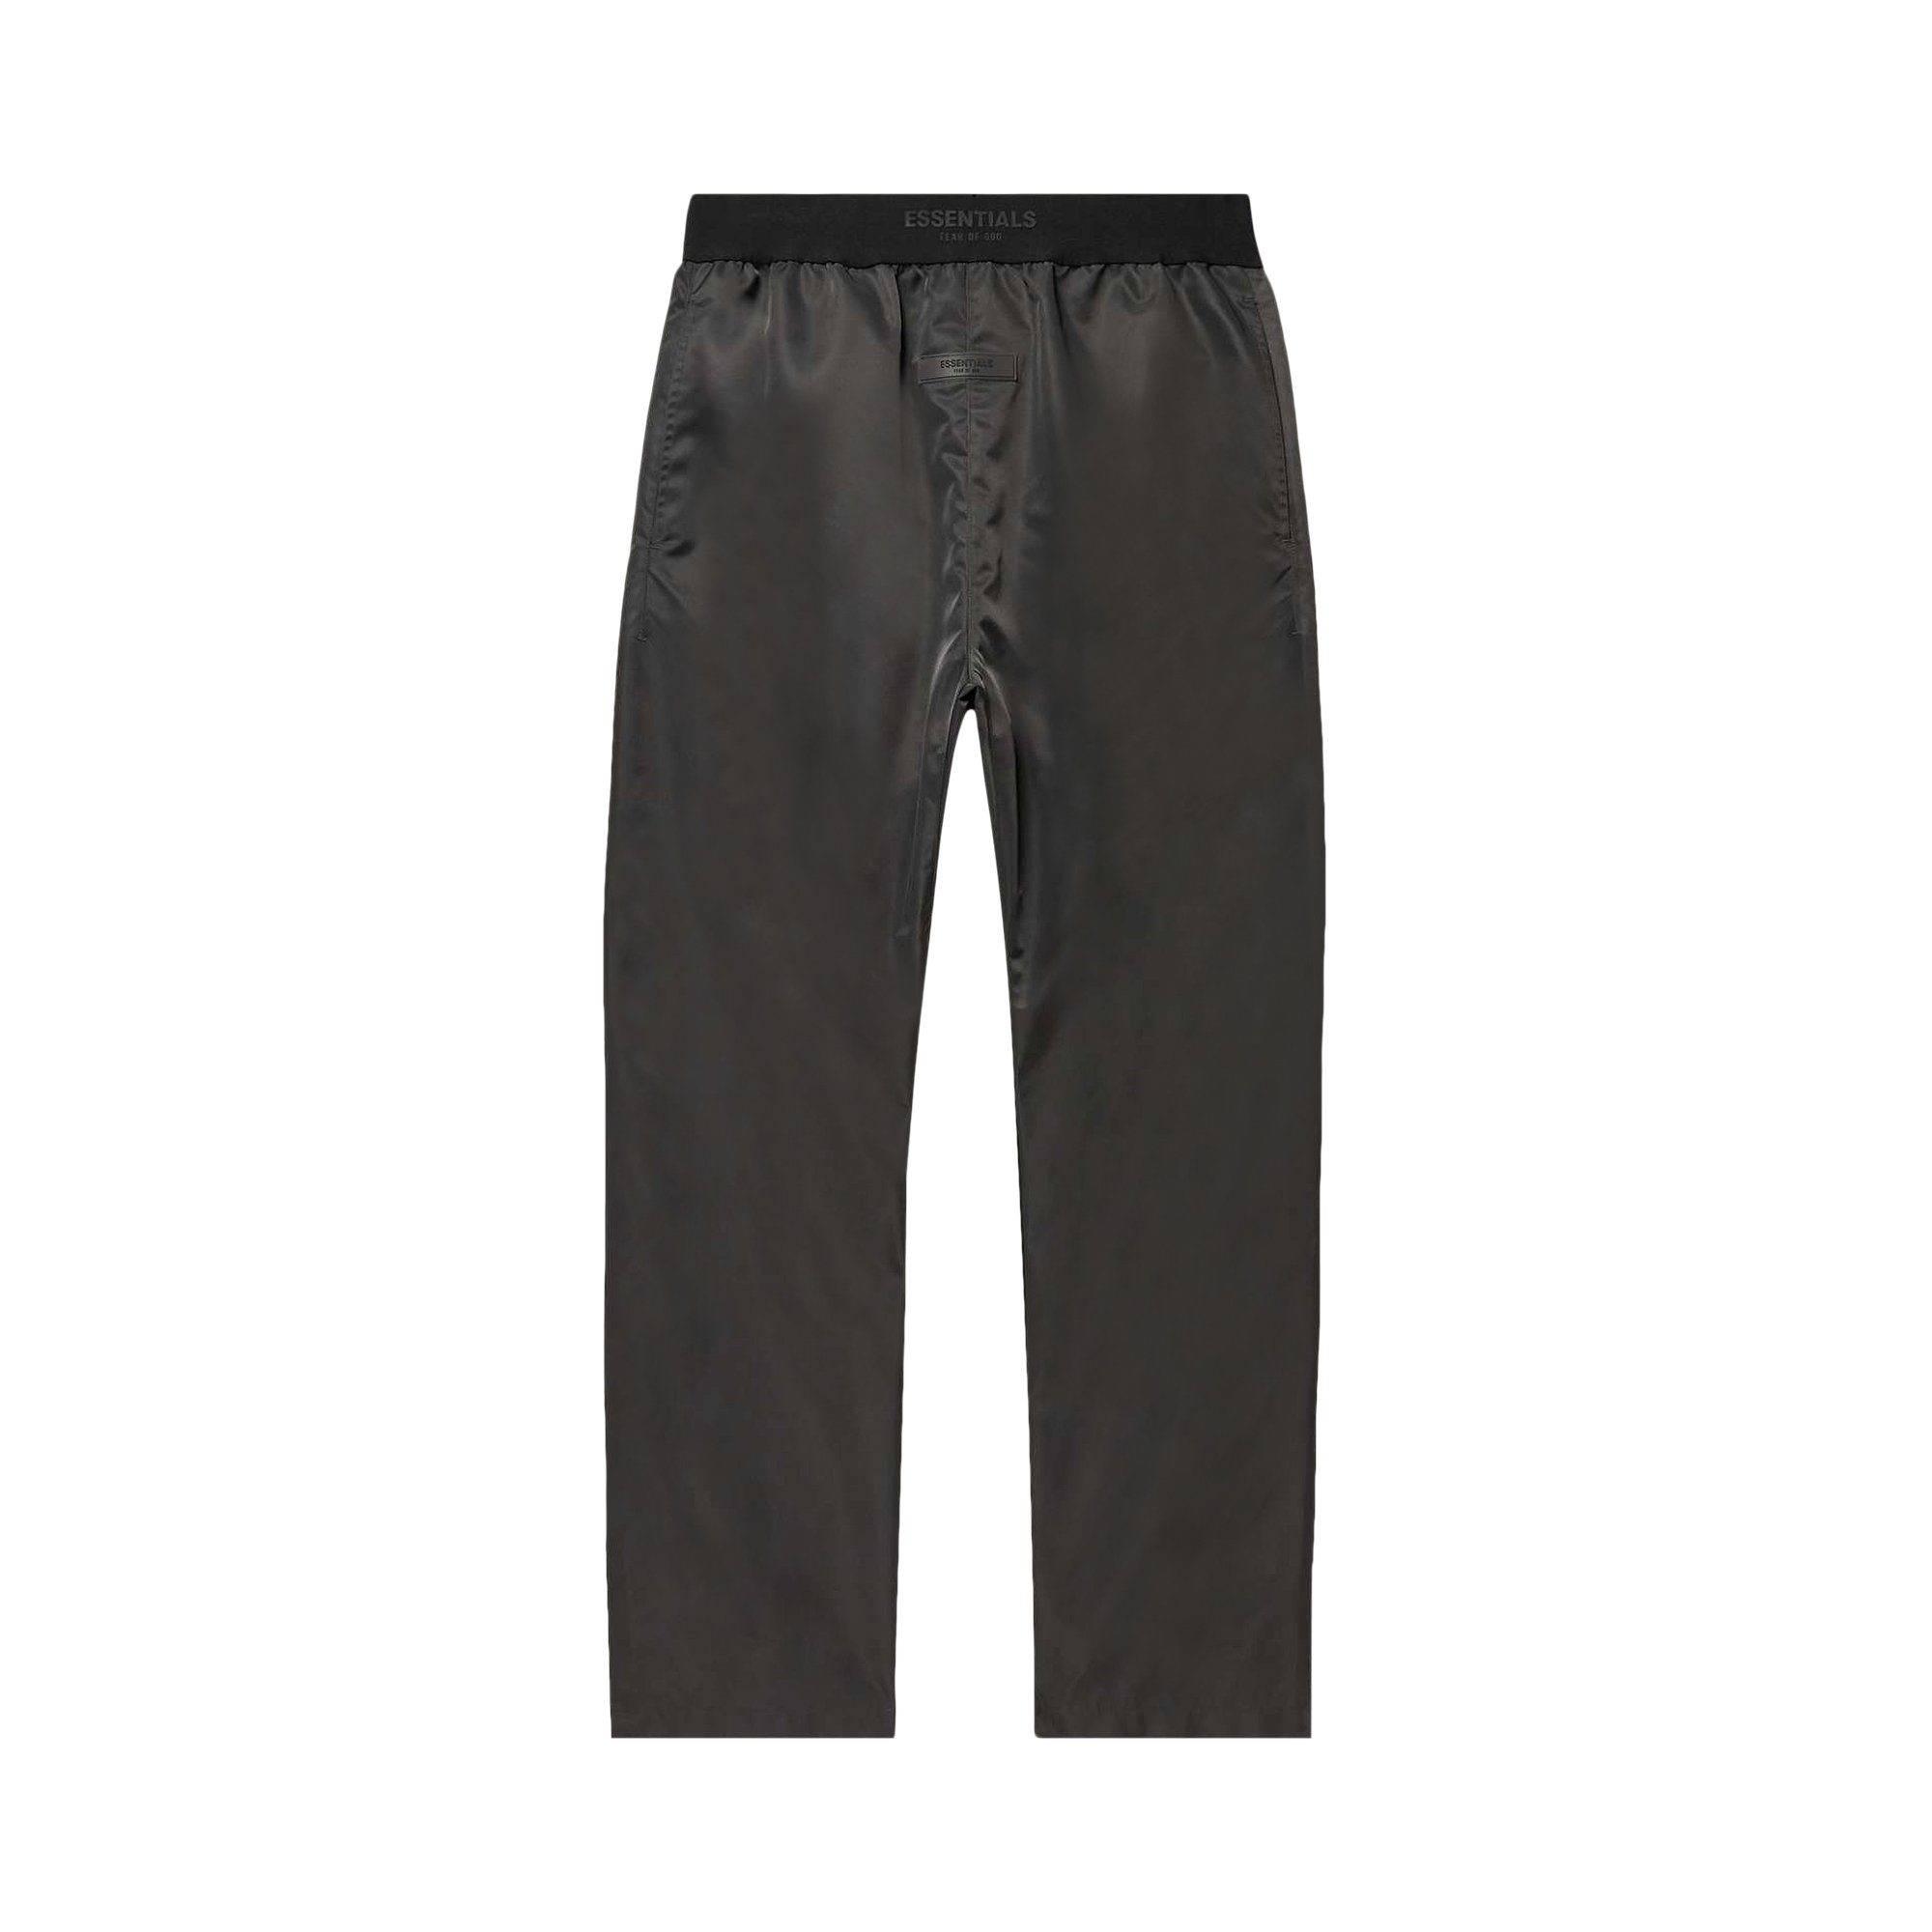 Buy Fear of God Essentials Relaxed Trouser 'Iron